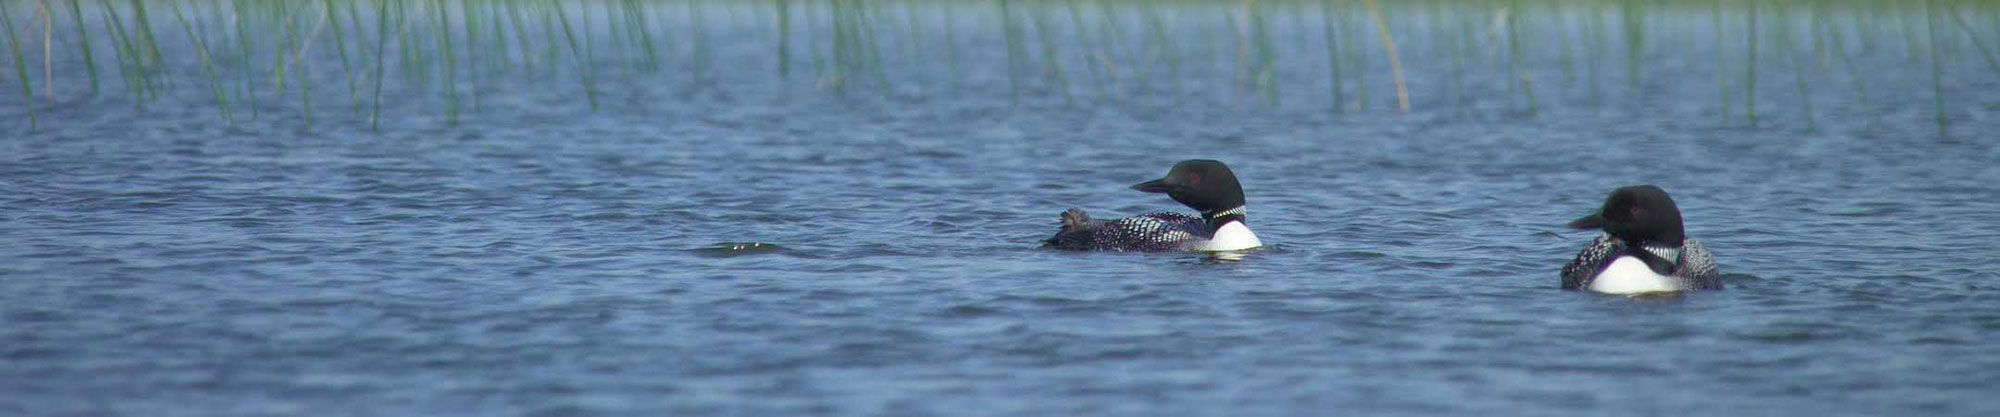 Two loons float on the surface of a wetland with cattails in the background.